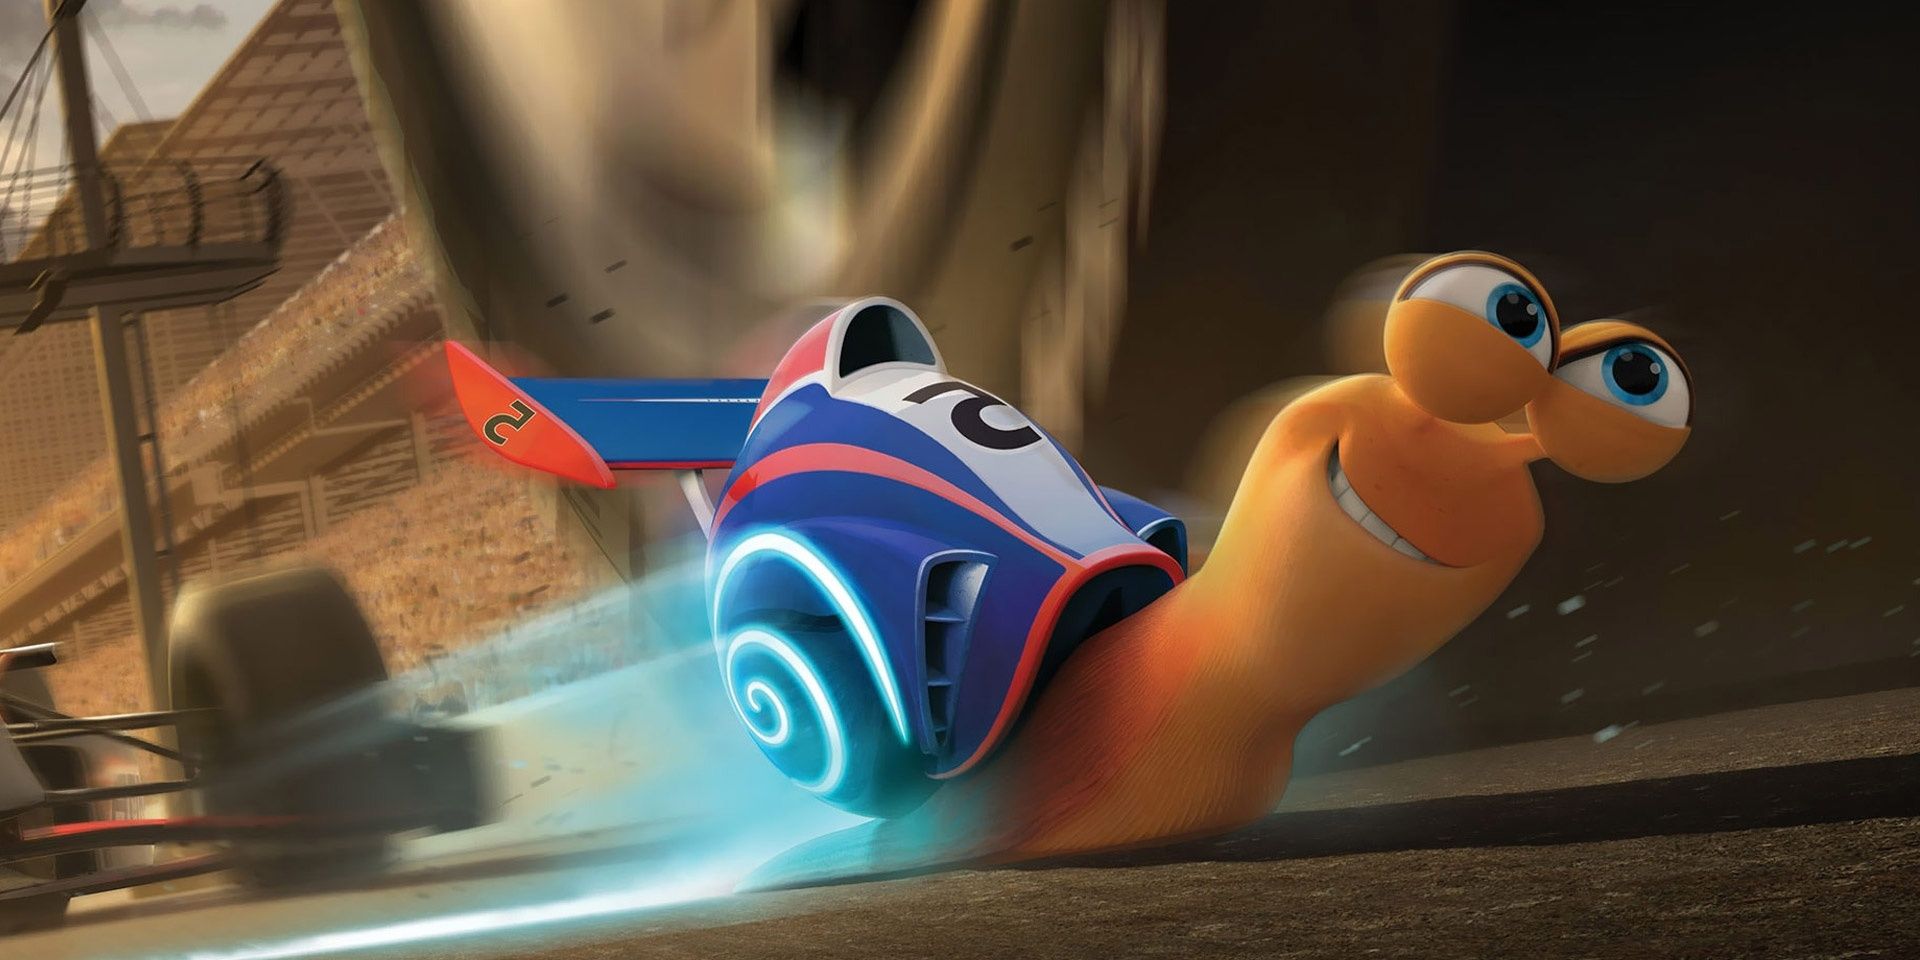 Turbo racing against cars